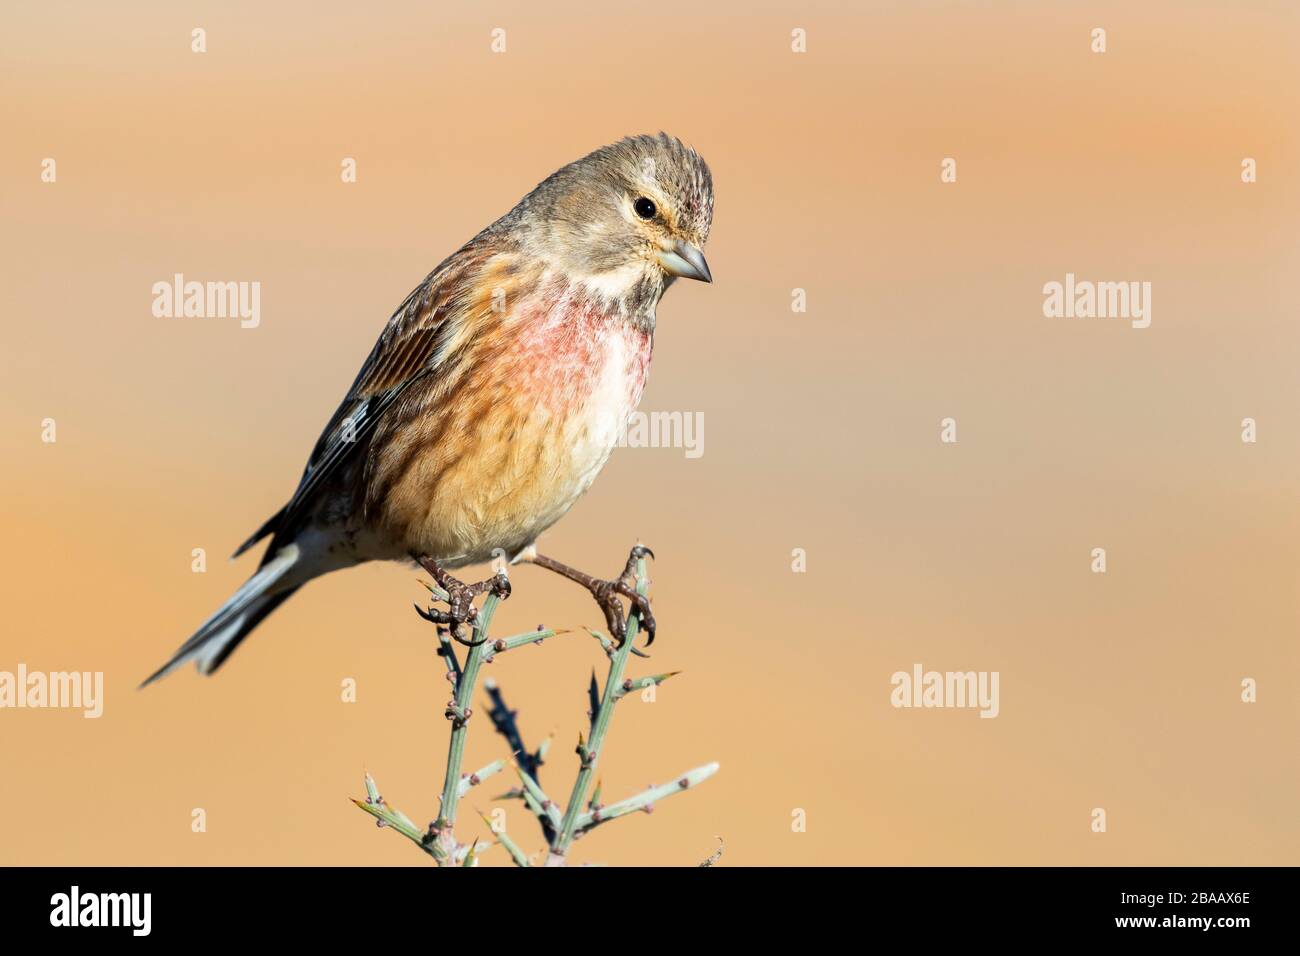 Common linnet male (carduelis cannabina) perched on a twig against a blurred natural background. Spain Stock Photo